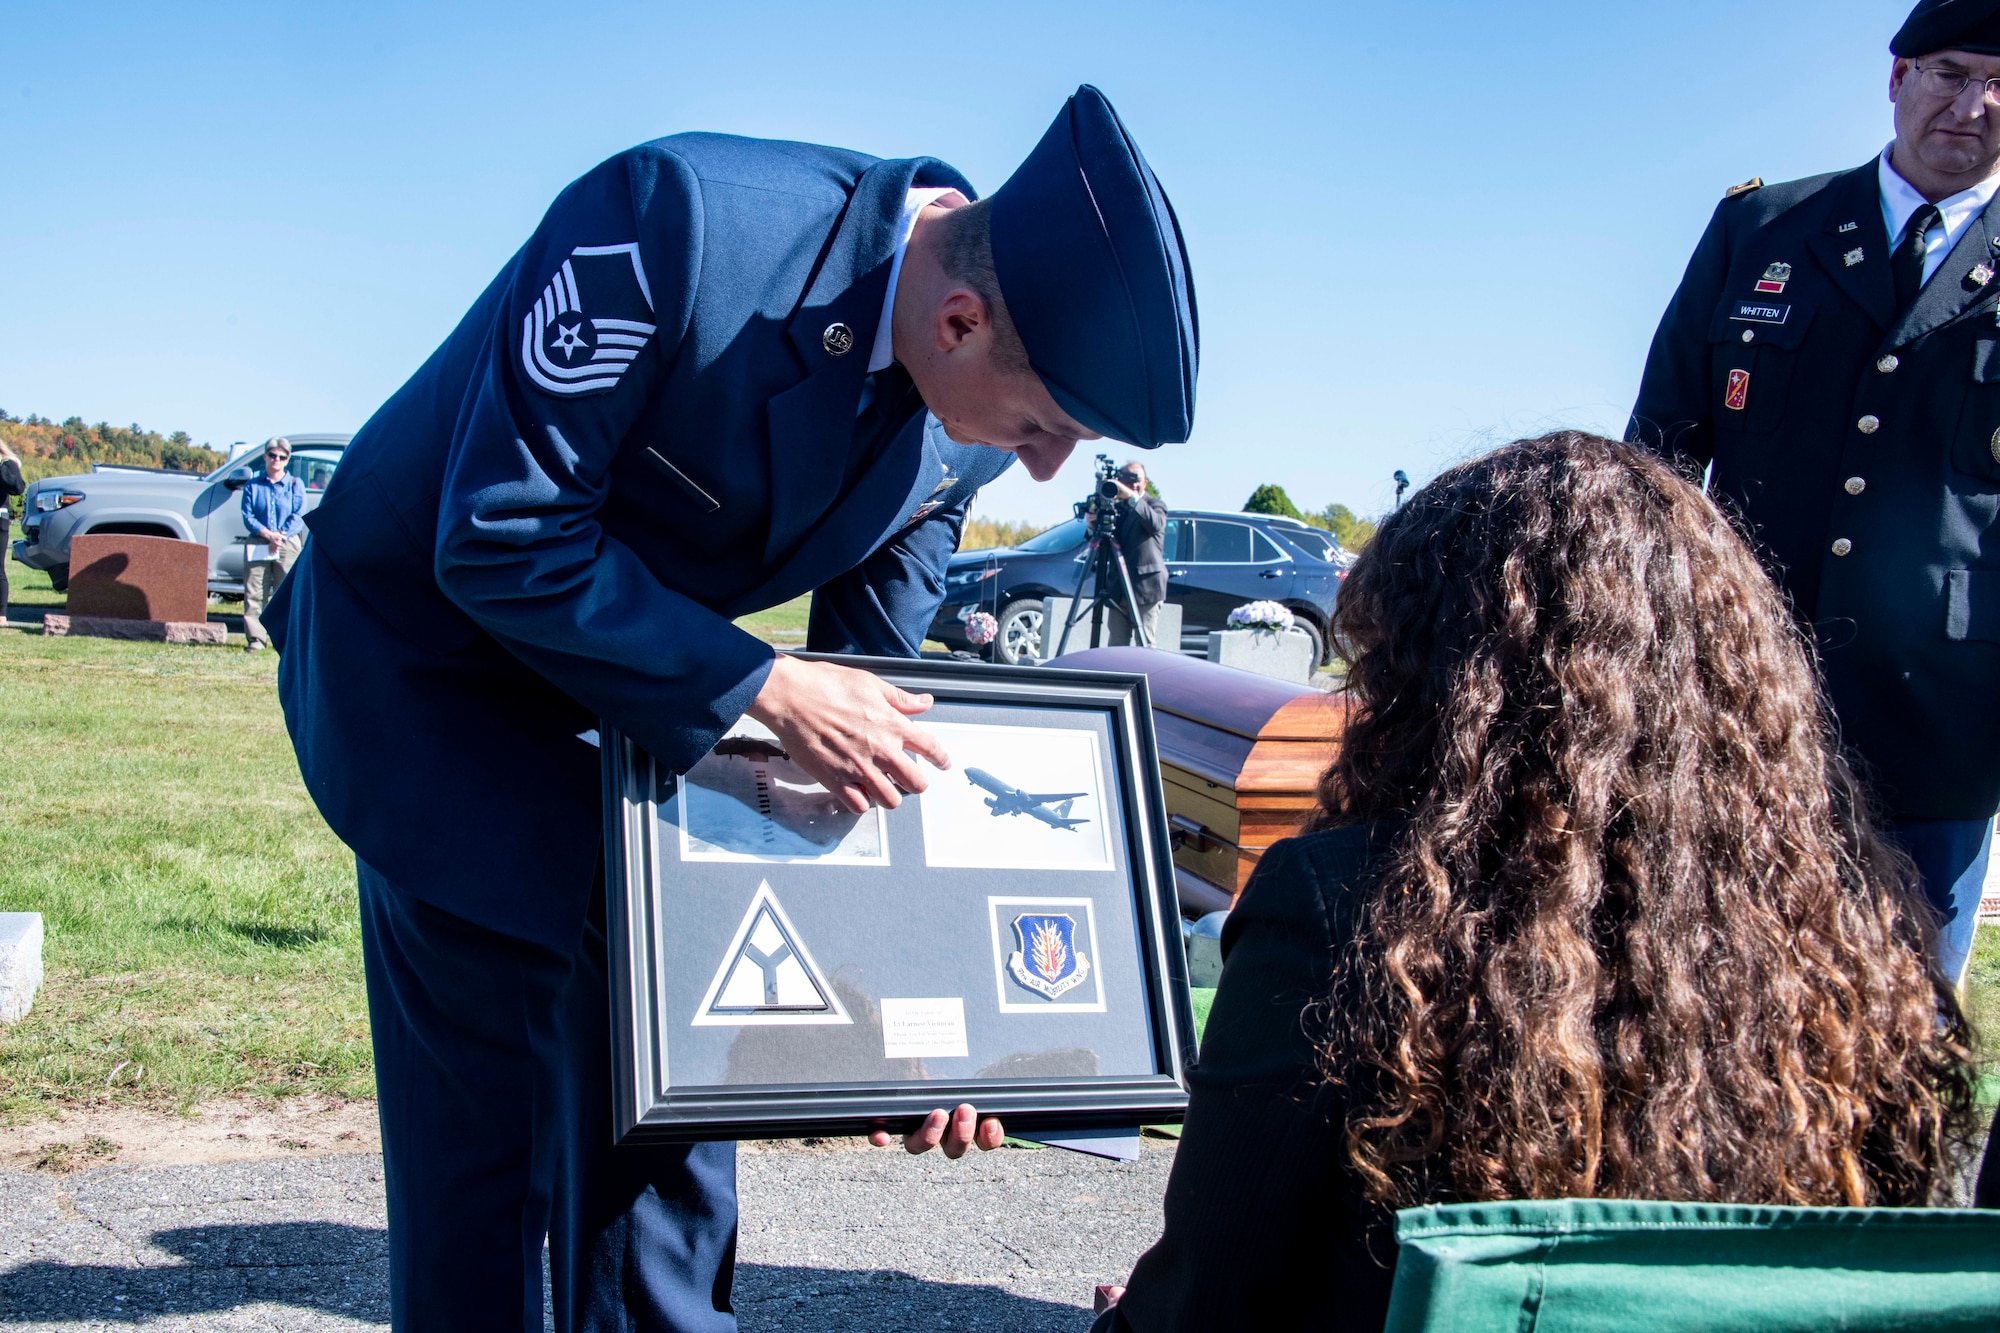 U.S. Air Force Master Sgt. Brad Edwards, 58th Airlift Squadron loadmaster, presents a plaque from the 97th Air Mobility Wing (AMW) to the family of U.S. Army Air Forces 2nd Lt. Ernest Vienneau, former 97th Bombardment Group pilot, during Vienneau’s funeral at Millinocket, Maine, Oct. 9, 2021. The plaque showcased the aircraft that Vienneau flew and the aircraft that was flown over the funeral by members of the 97th AMW. (U.S. Air Force photo by Staff Sgt. Cody Dowell)